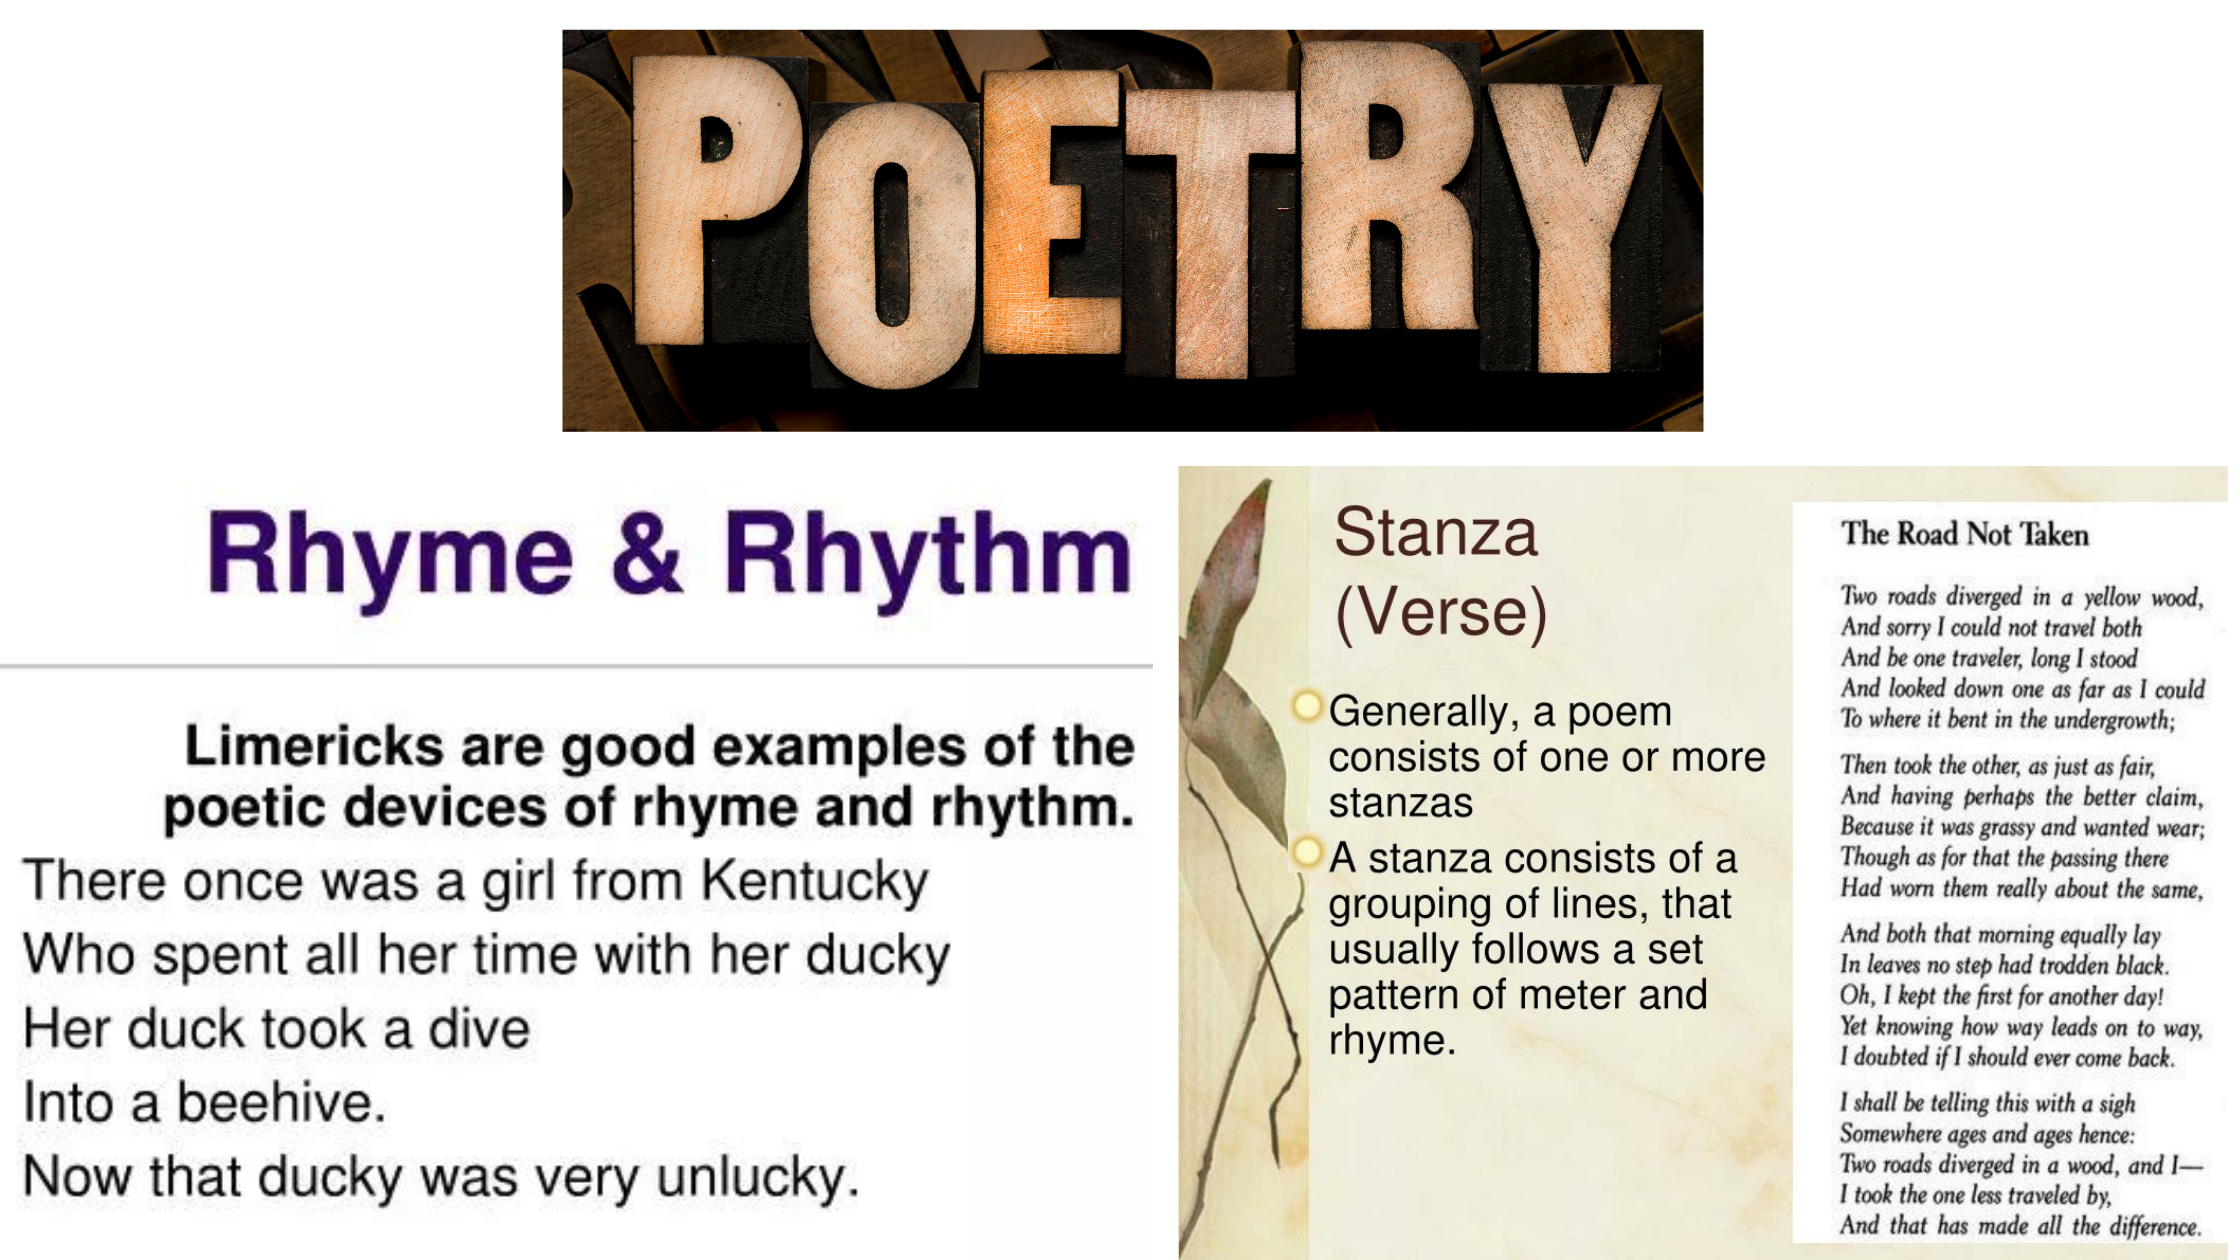 Introduction to Poetry: Rhymes, Rhythms, and Stanzas